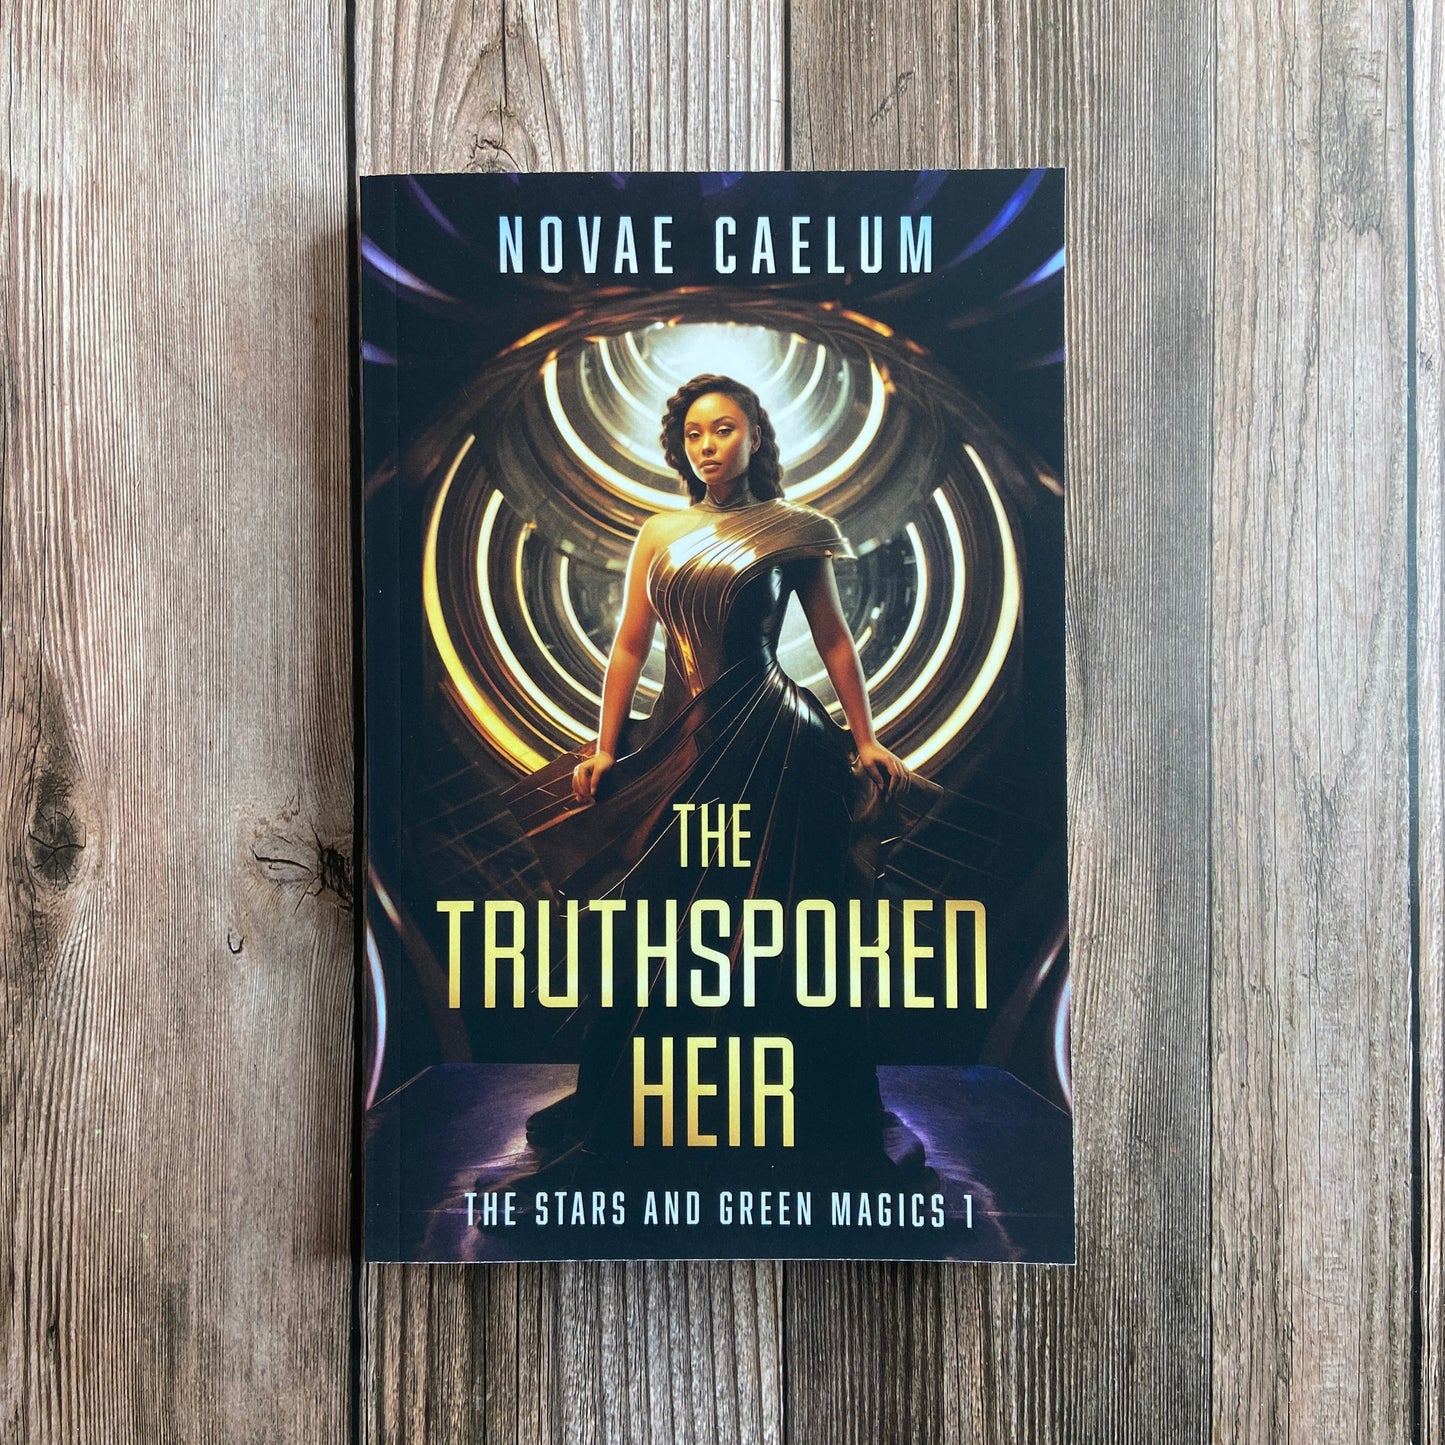 The Novae Caelum book cover for "SIGNED The Truthspoken Heir: The Stars and Green Magics Book 1 (Paperback)" depicts a captivating tale of forbidden love intertwined with shapeshifting powers.